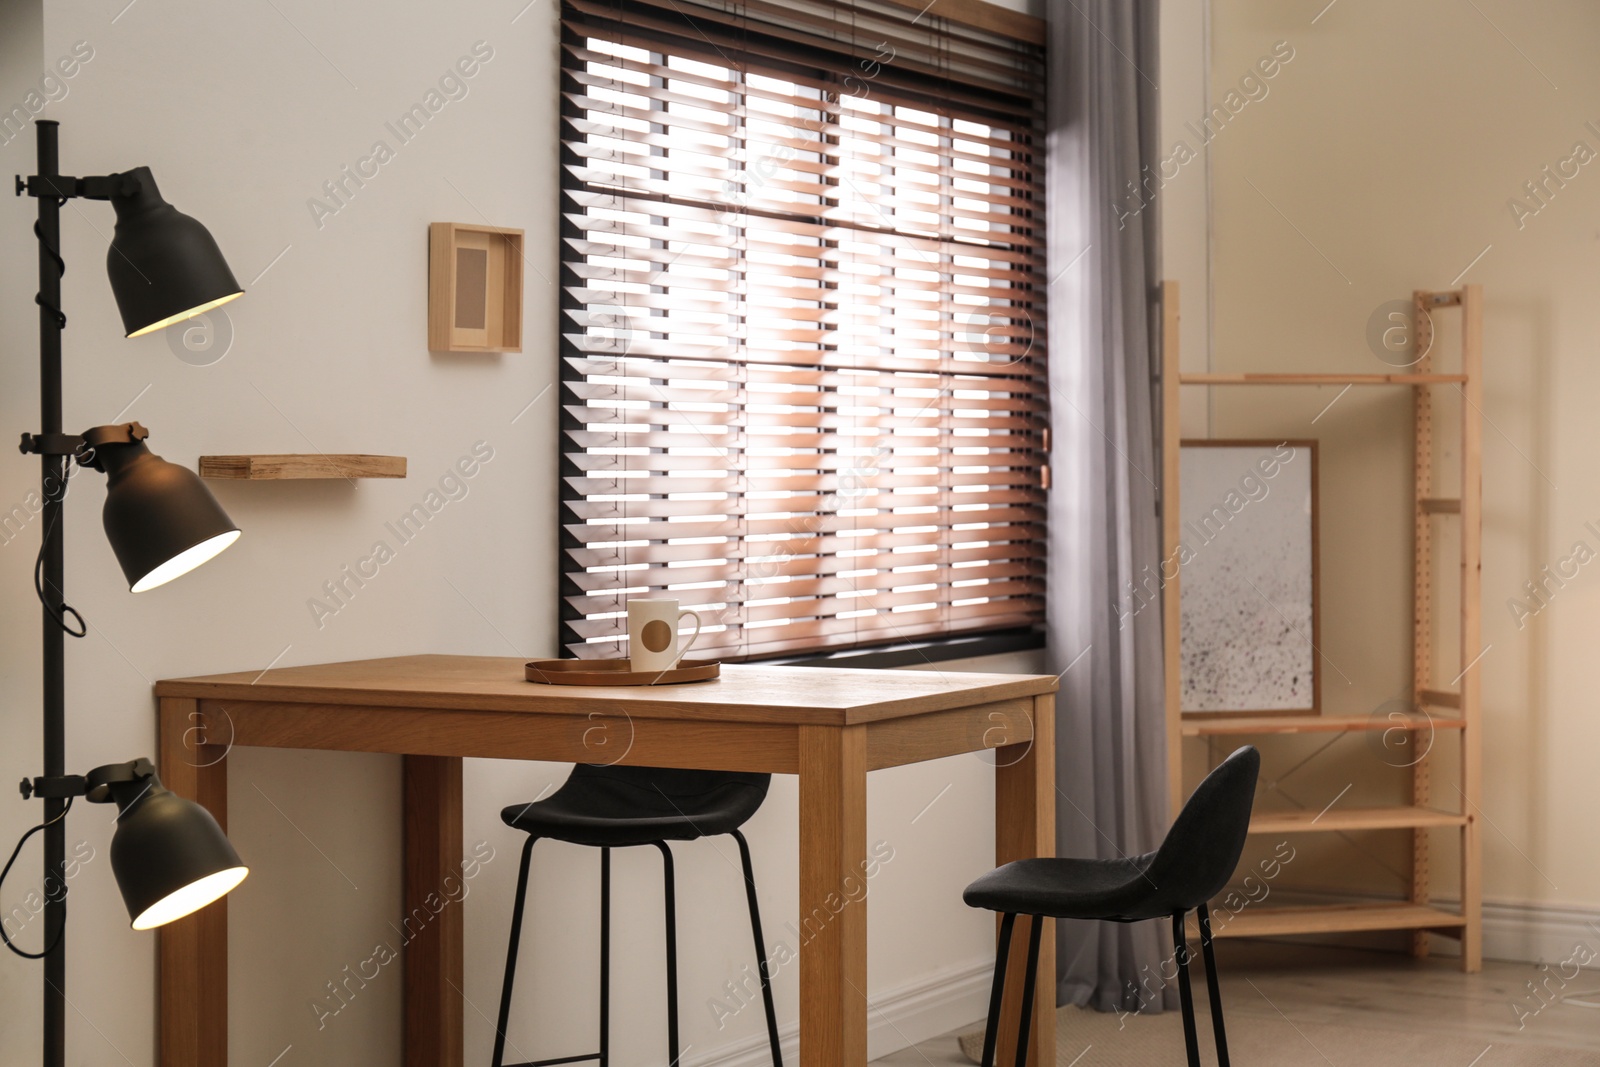 Photo of Modern room interior with table set, window blinds and stylish decor elements